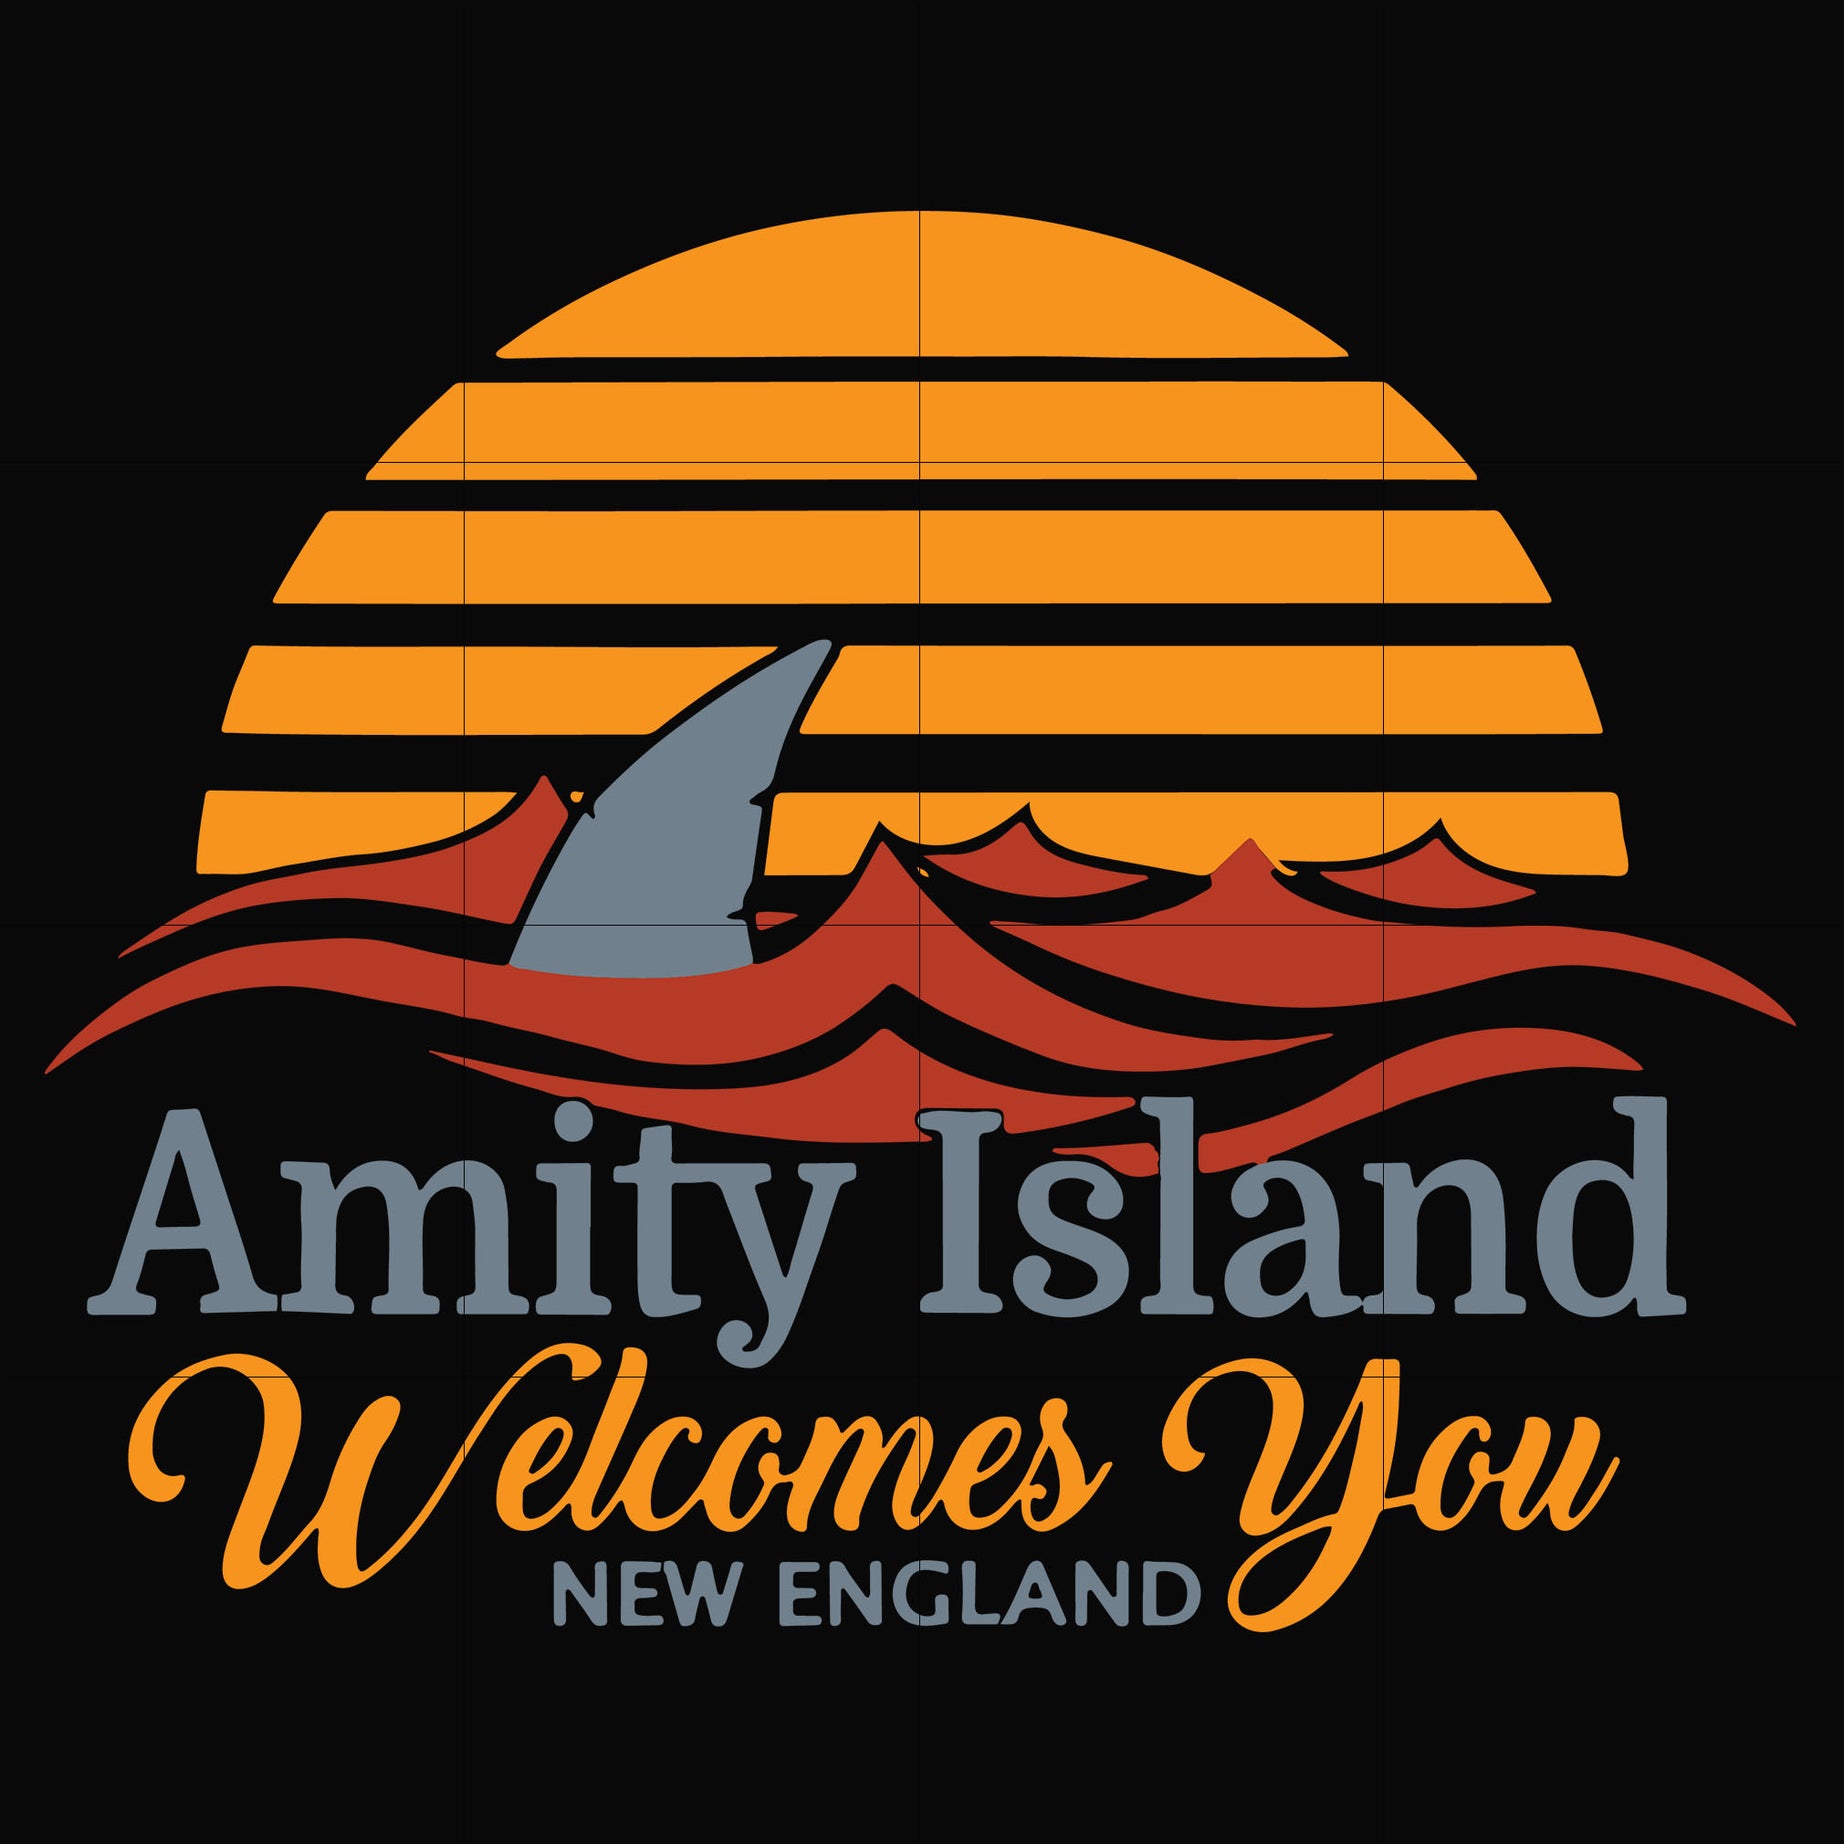 Amity island welcomes you new england svg, png, dxf, eps digital file OTH0069-